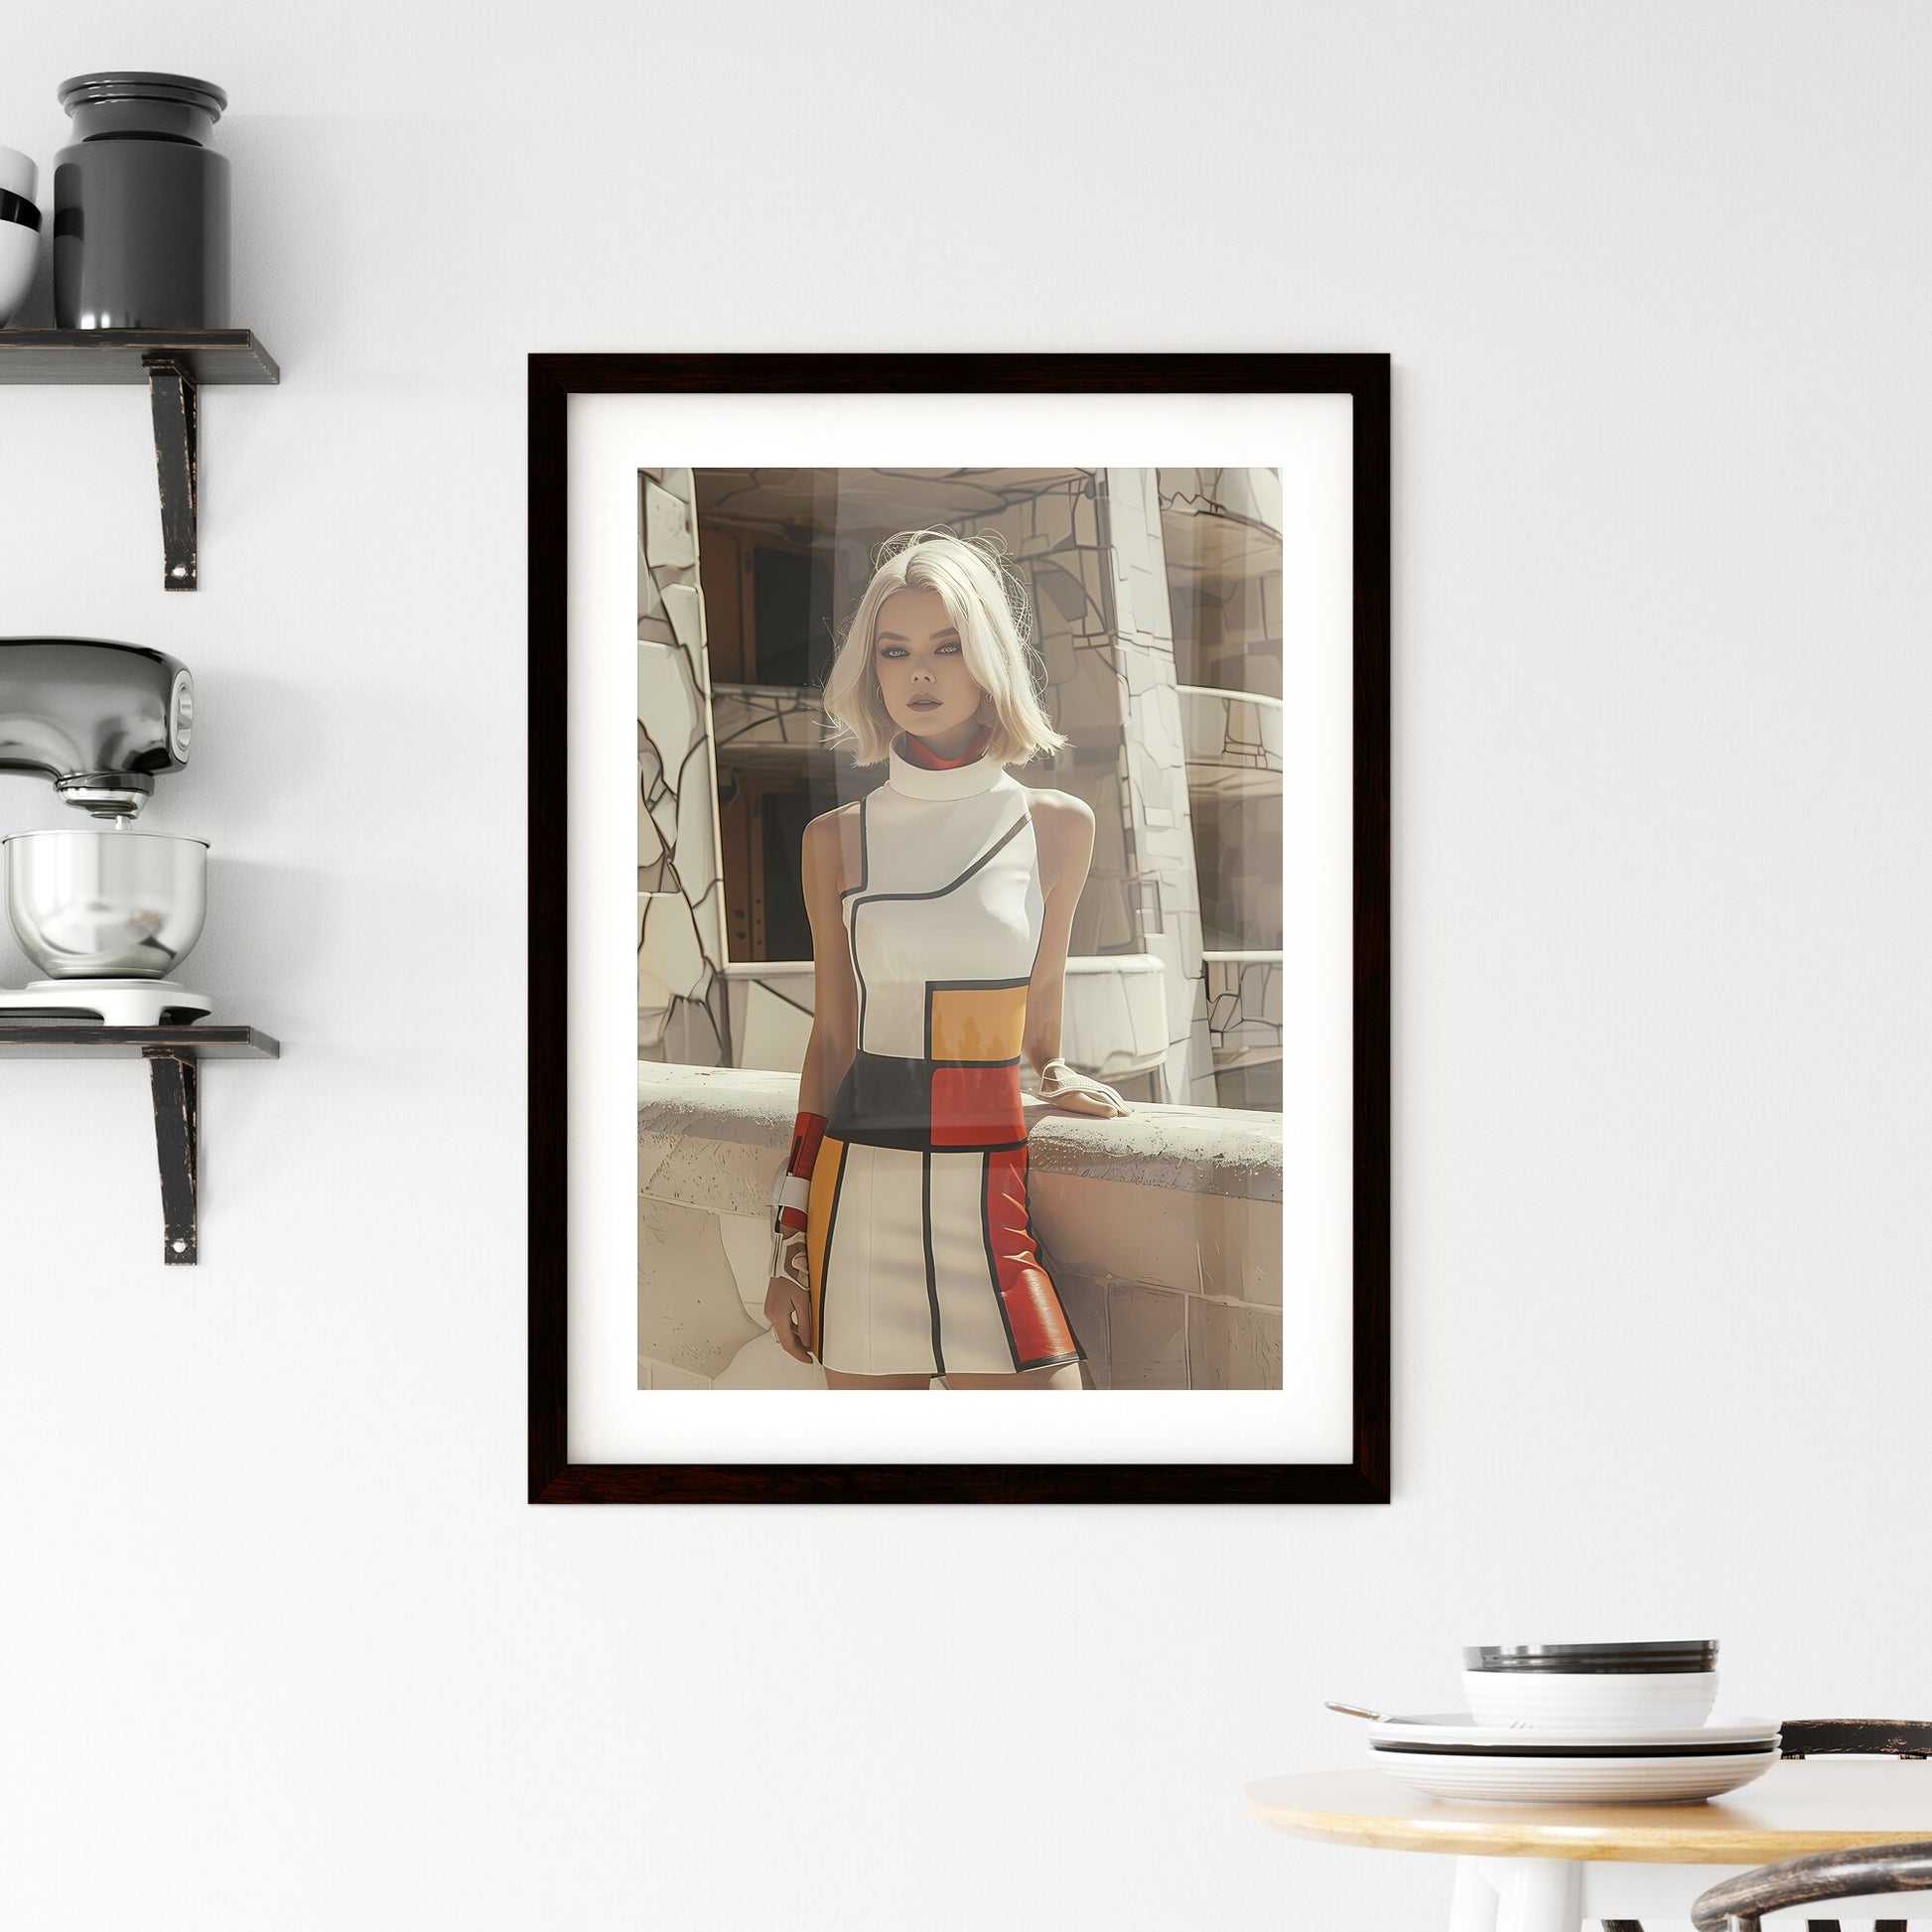 Vibrant Retro Futuristic Painting of a Blonde Woman in a 60s-Inspired Dress and Boots, Minimalist House Background, Art Focus Default Title